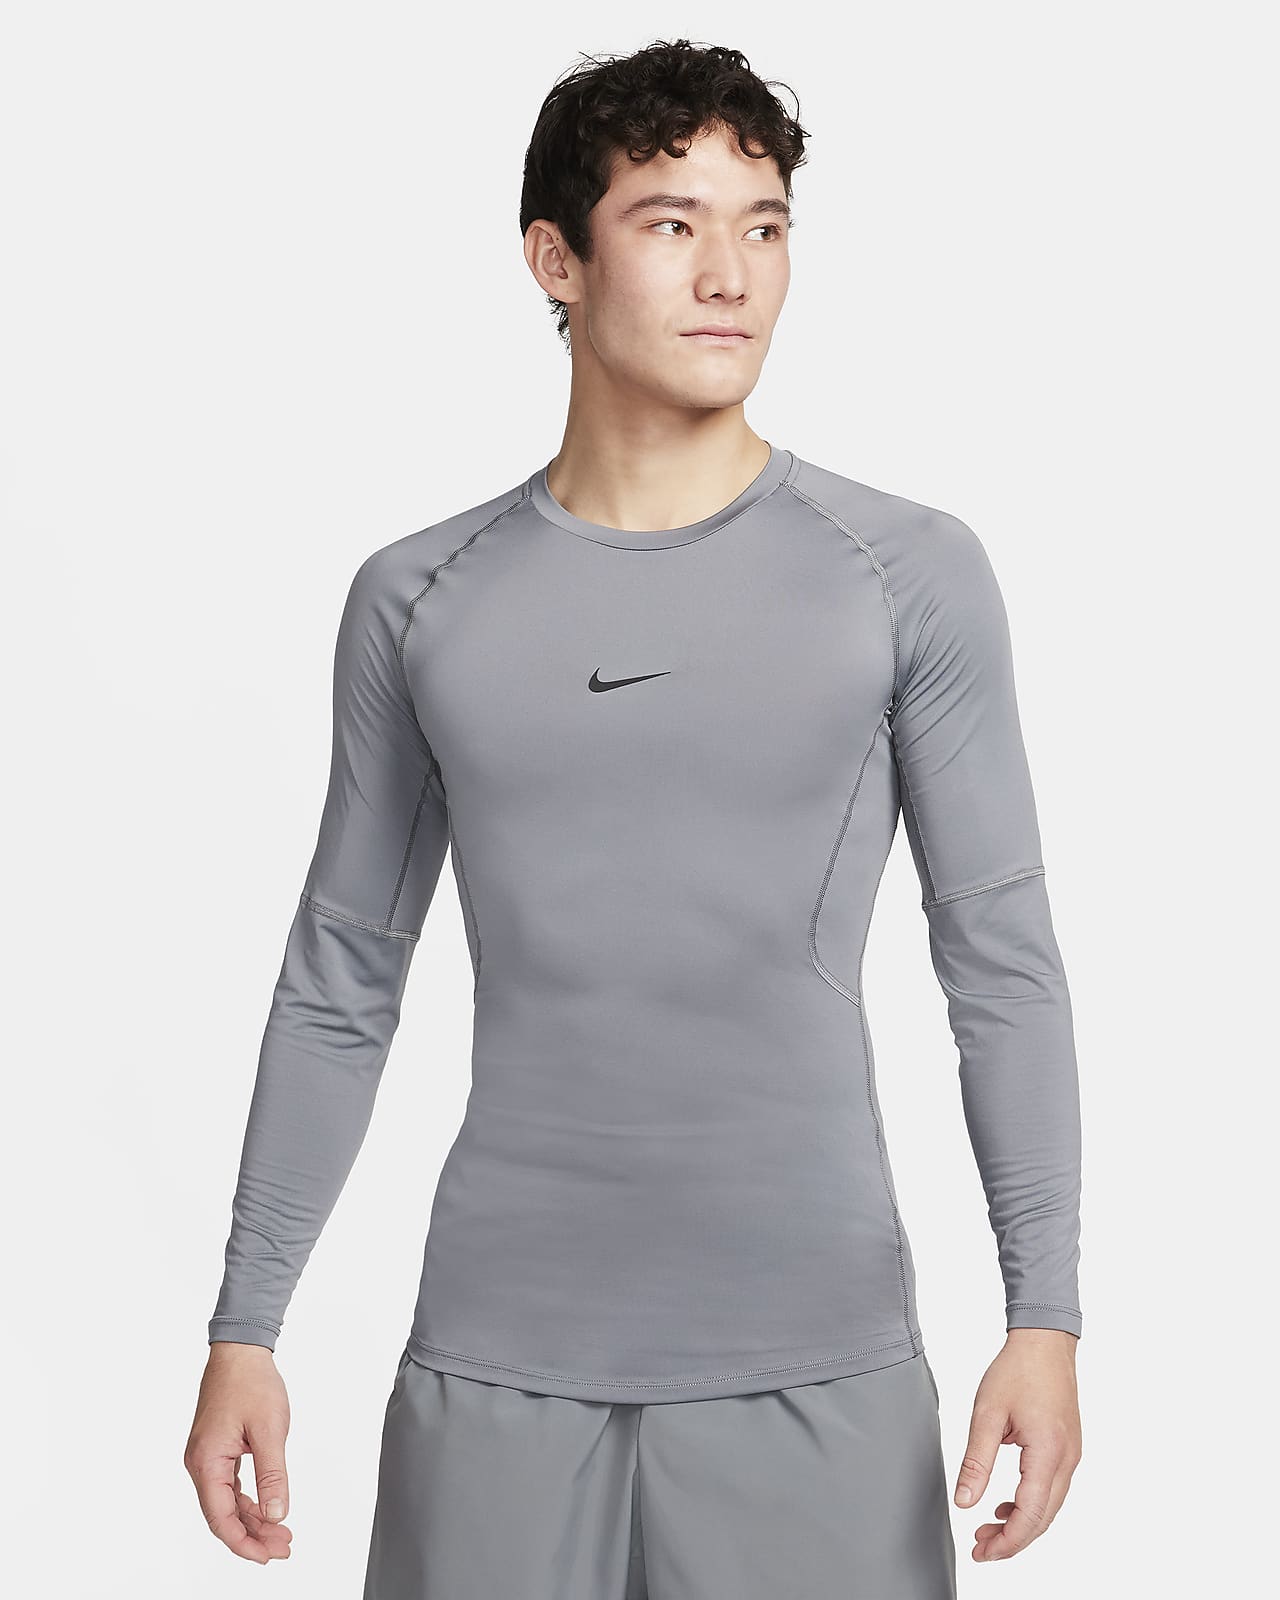 https://static.nike.com/a/images/t_PDP_1280_v1/f_auto,q_auto:eco/29fbdd2b-05a8-44dd-ad79-3685e3c178fe/pro-dri-fit-tight-long-sleeve-fitness-top-zfSXJl.png